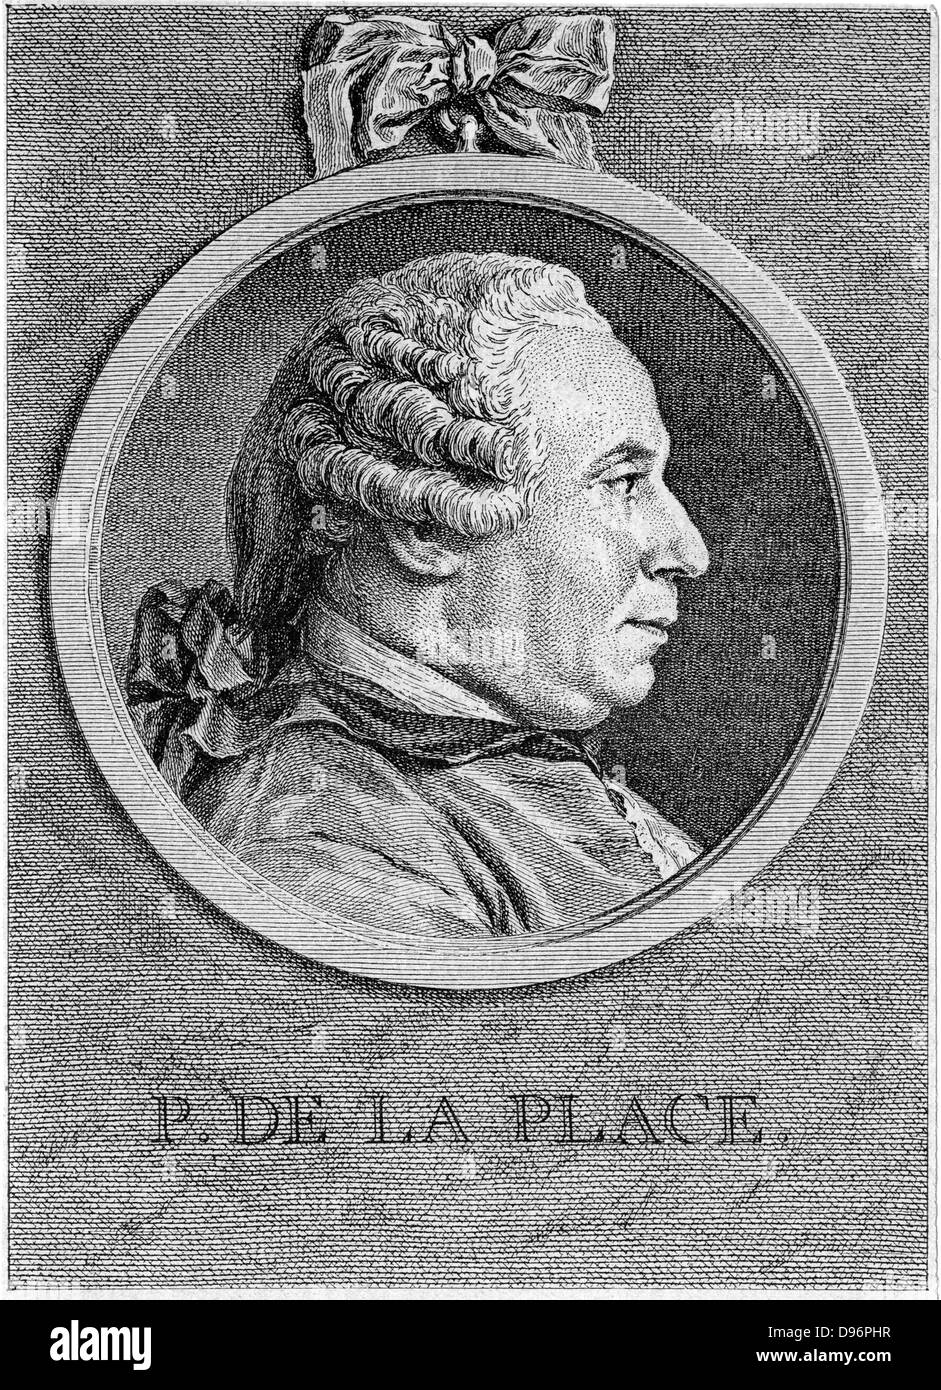 Pierre Simon Laplace (1749-1827), French mathematician and astronomer.  His five volume 'Mecanique celeste' 1799-1825 was the greatest work on celestial mechanics since Newton's 'Principia'. 18th century Engraving. Stock Photo